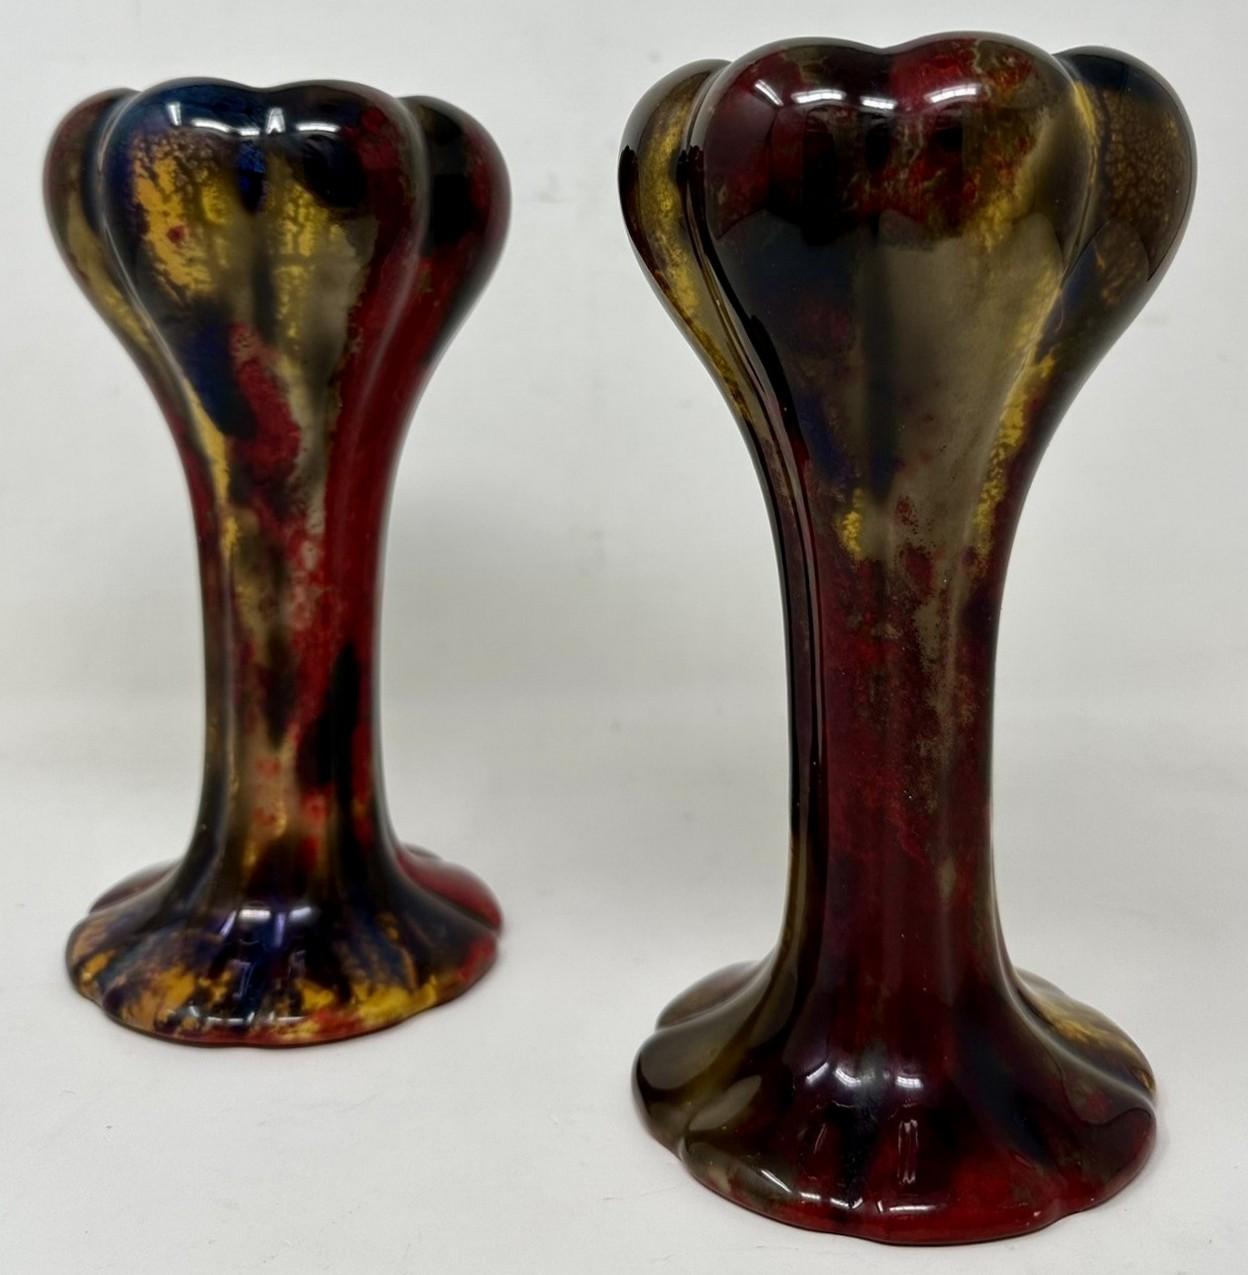 An Exceptional Pair of English Royal Doulton Flambe Sung Ware Earthenware Vases firmly attributed to Charles Noke. First quarter of the Twentieth Century, possibly early Art Deco Period. 
Each high – fired glazed vase of ovoid outline with ribbed